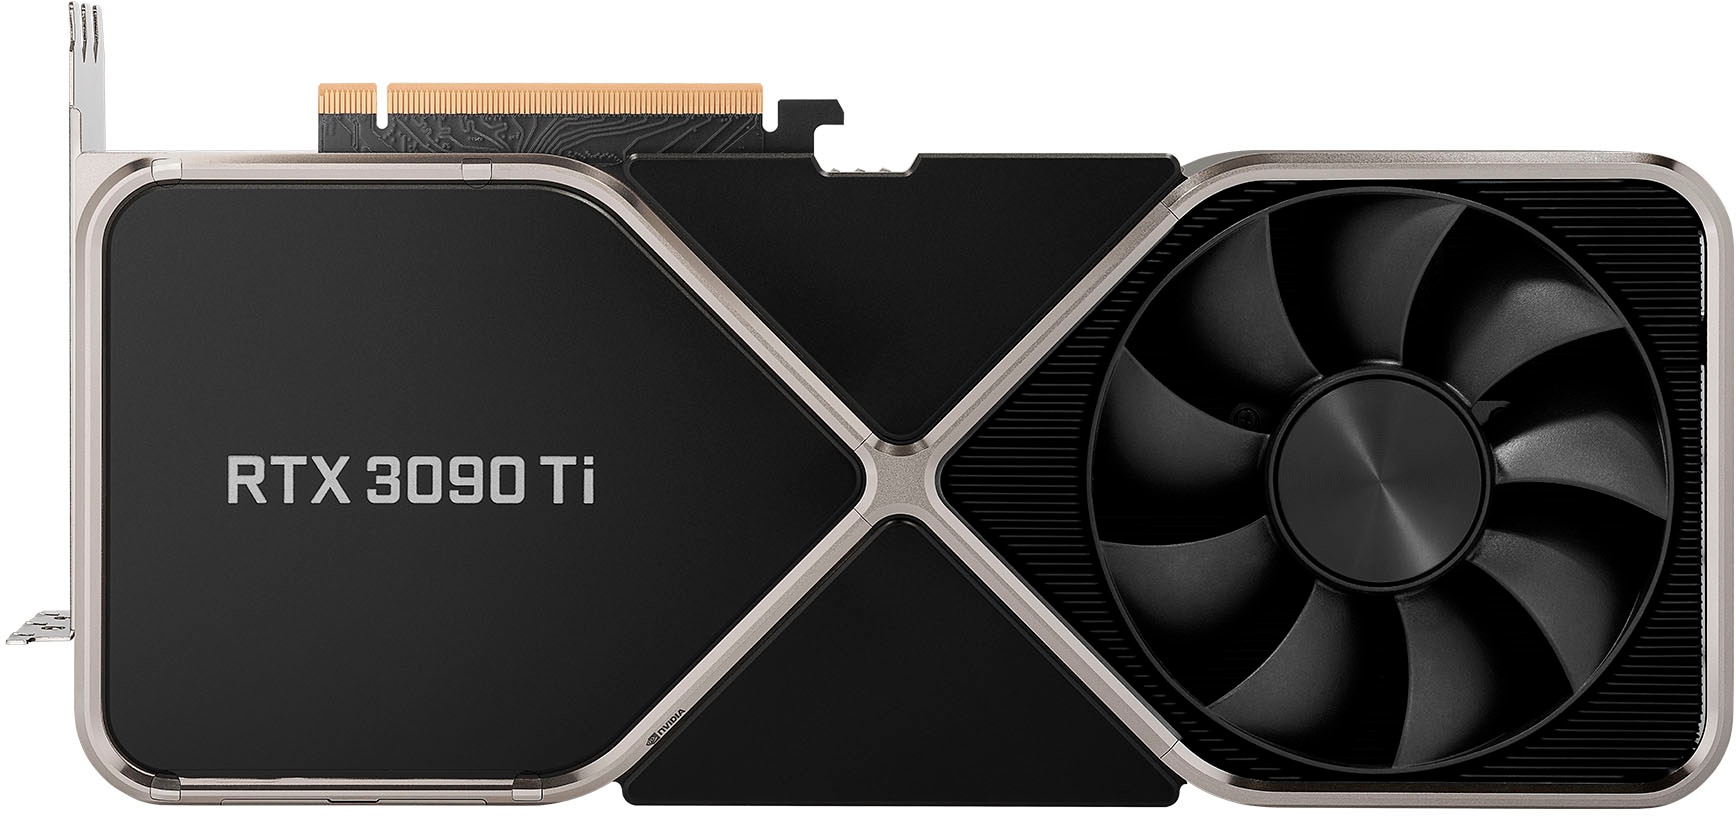 Nvidia's GeForce RTX 3090 Ti is now launched for $1,999